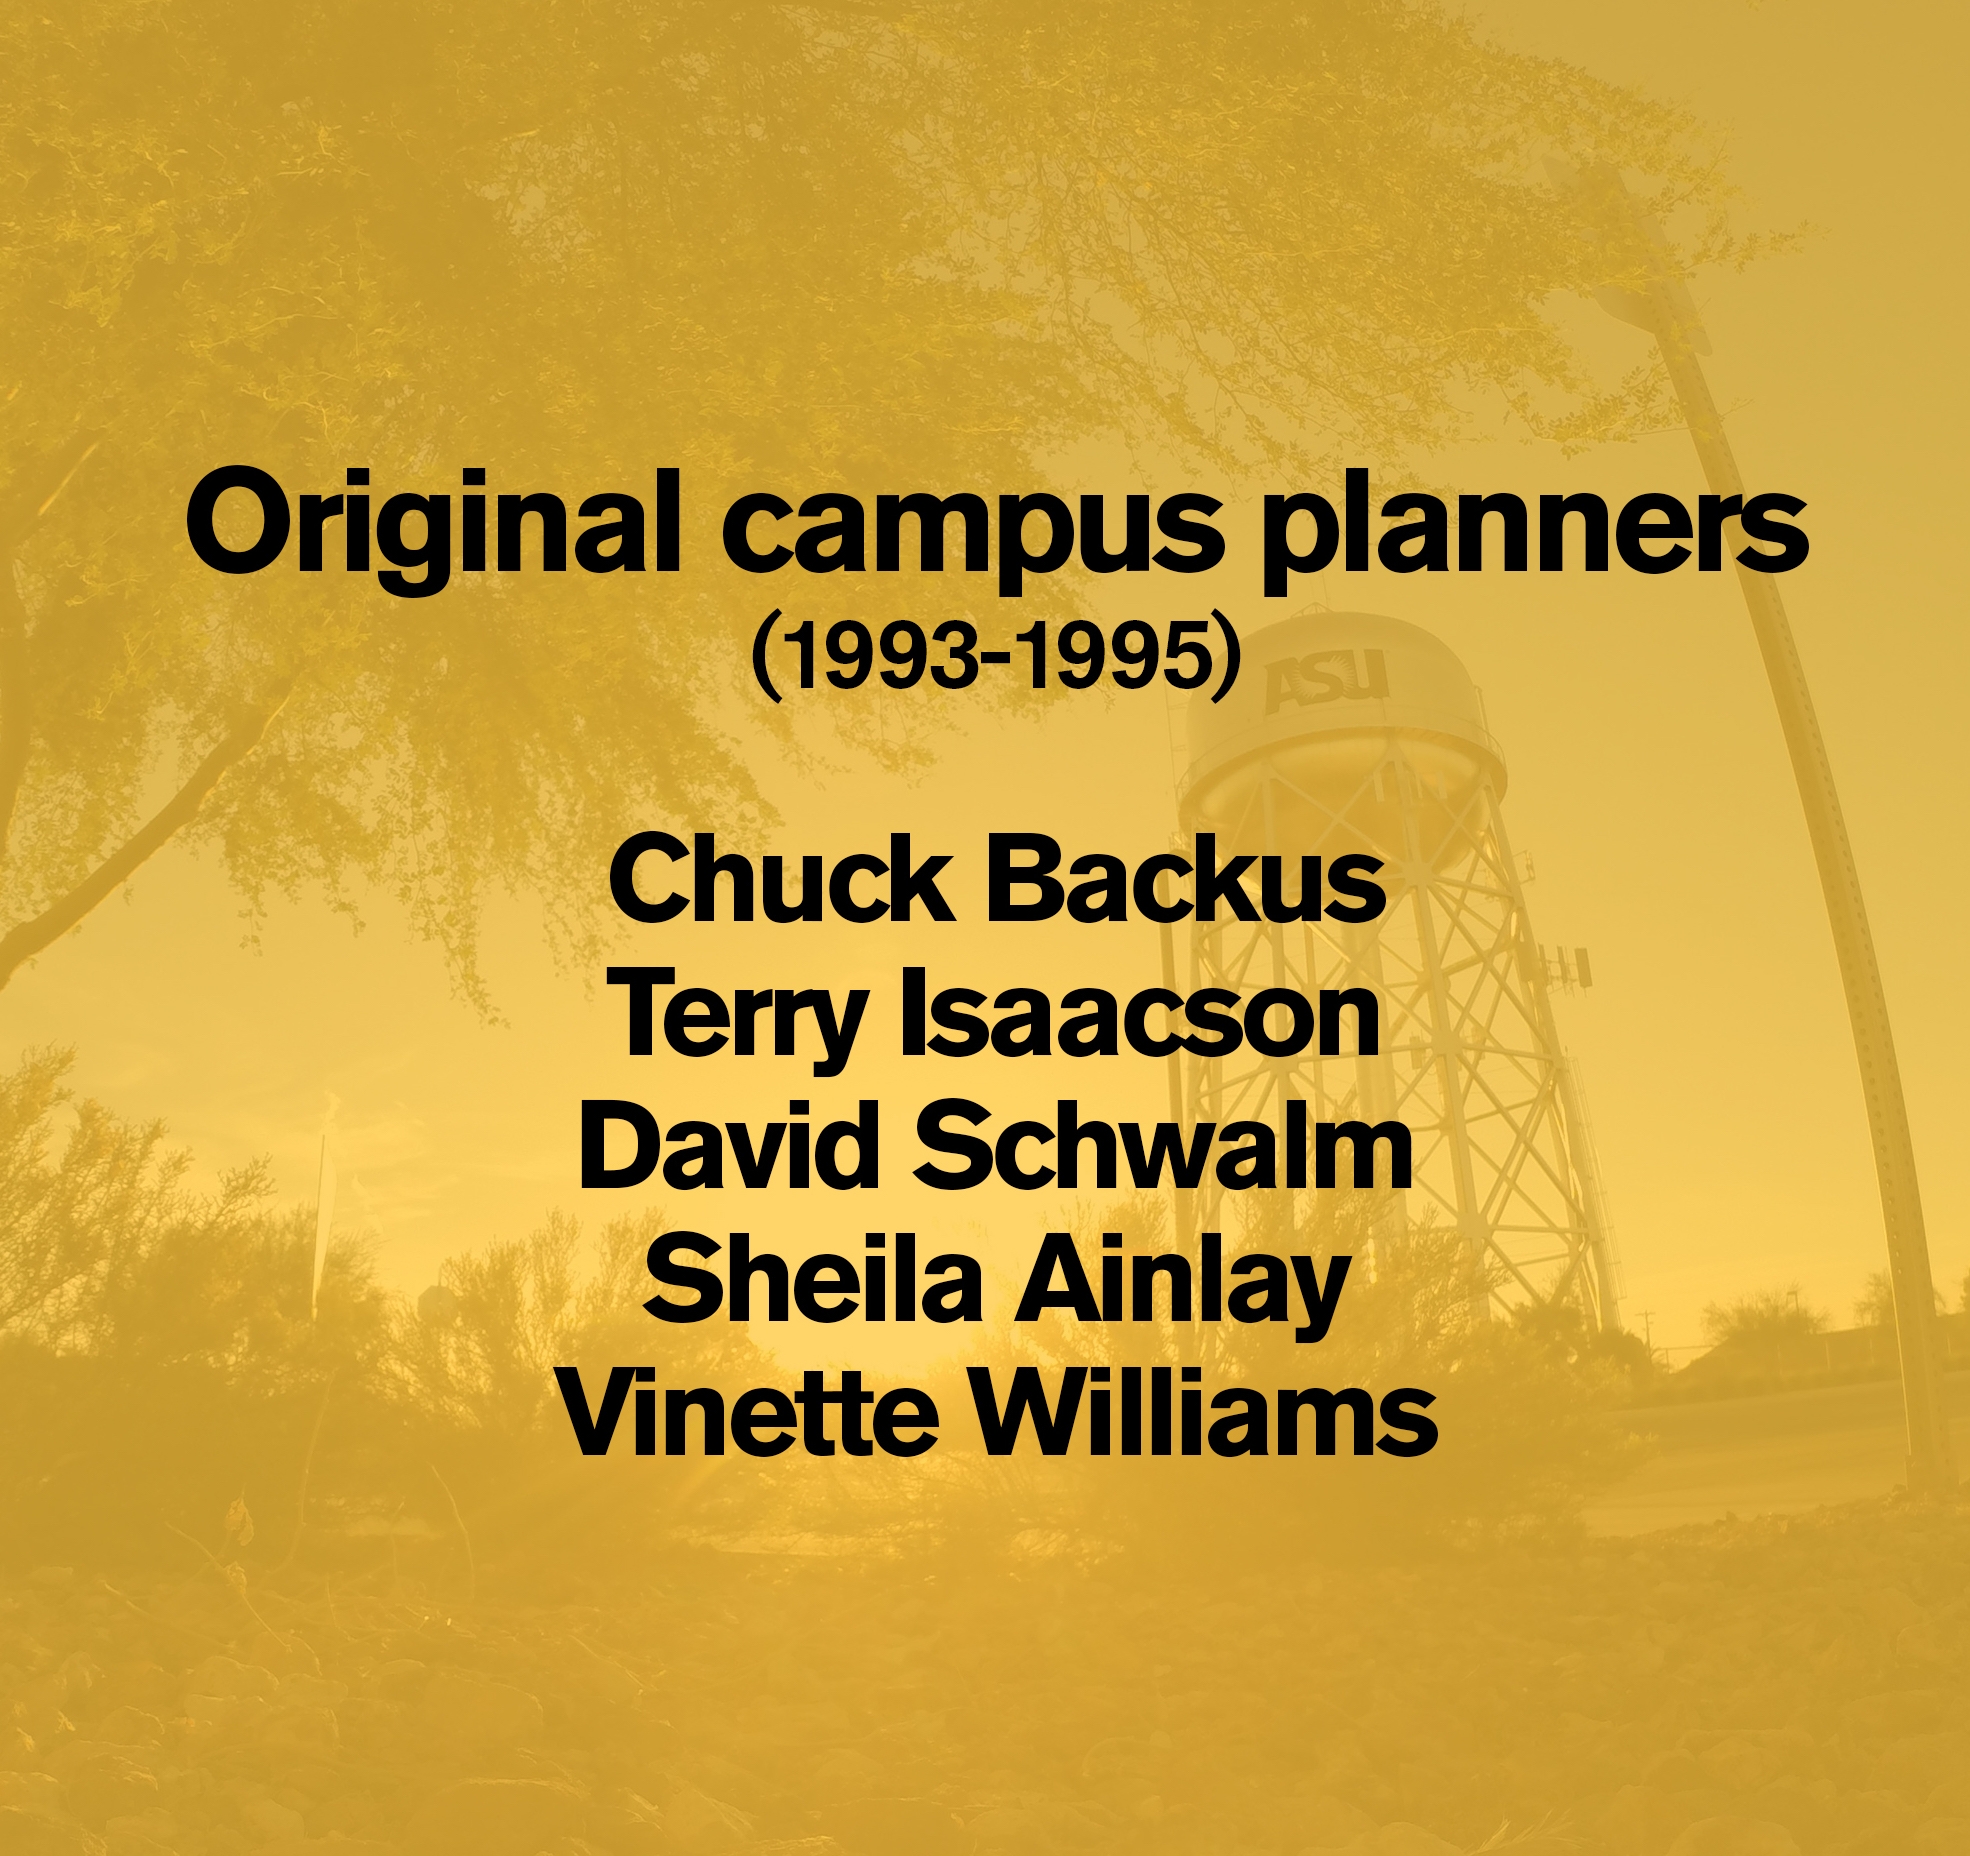 Graphic with the names of the Polytechnic campus original planners: Chuck Backus, Terry Isaacson, David Schwalm, Sheila Ainlay, Vinette Williams